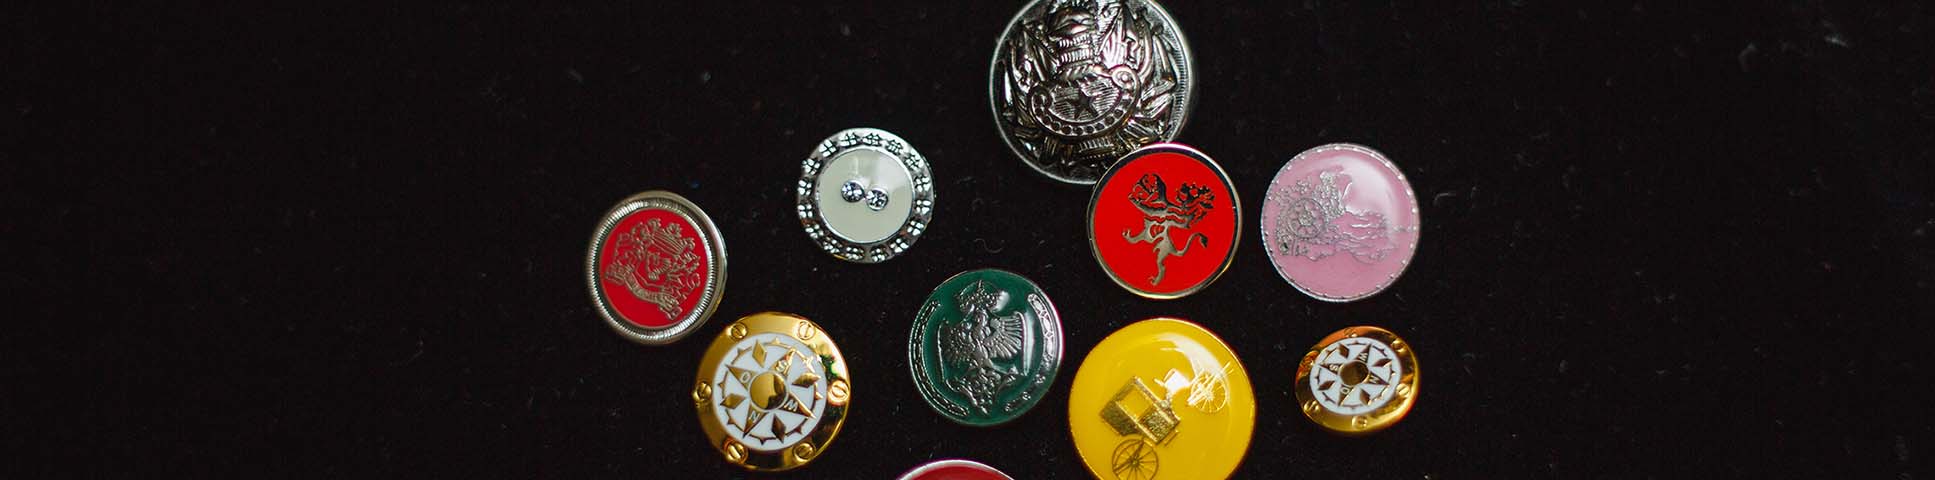 Metal sewing buttons